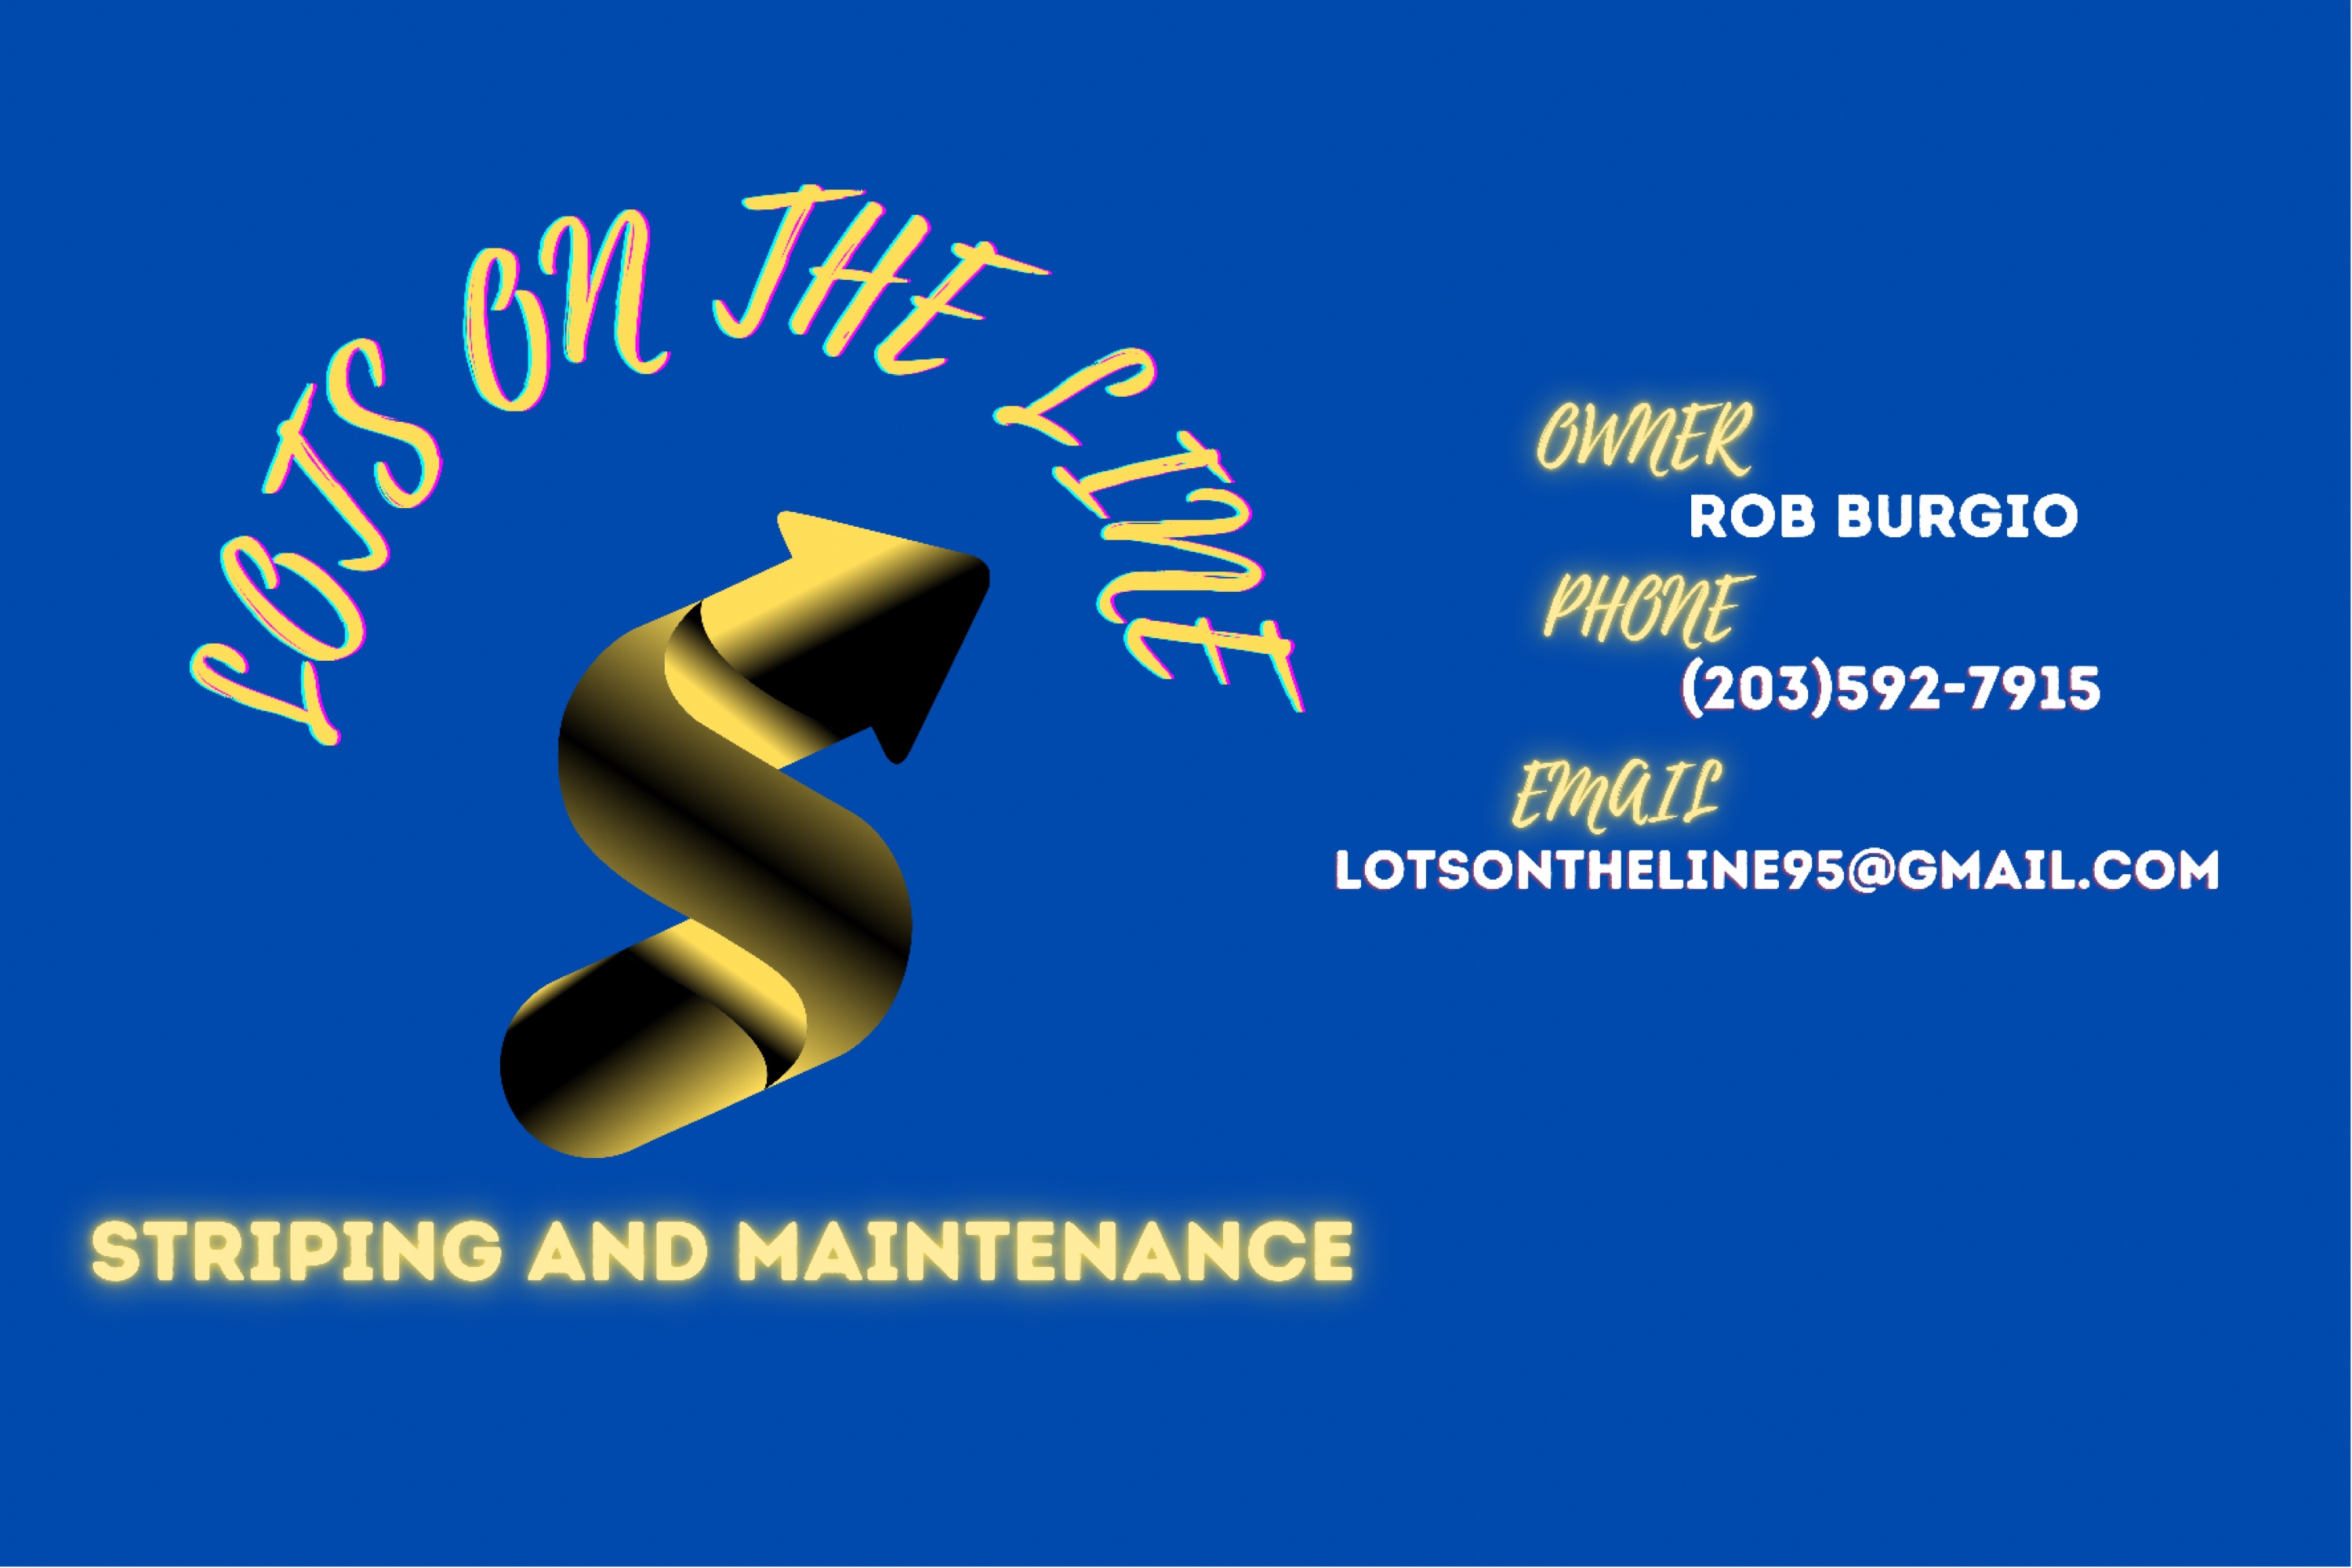 Lots On The Line Striping and Maintenance Logo